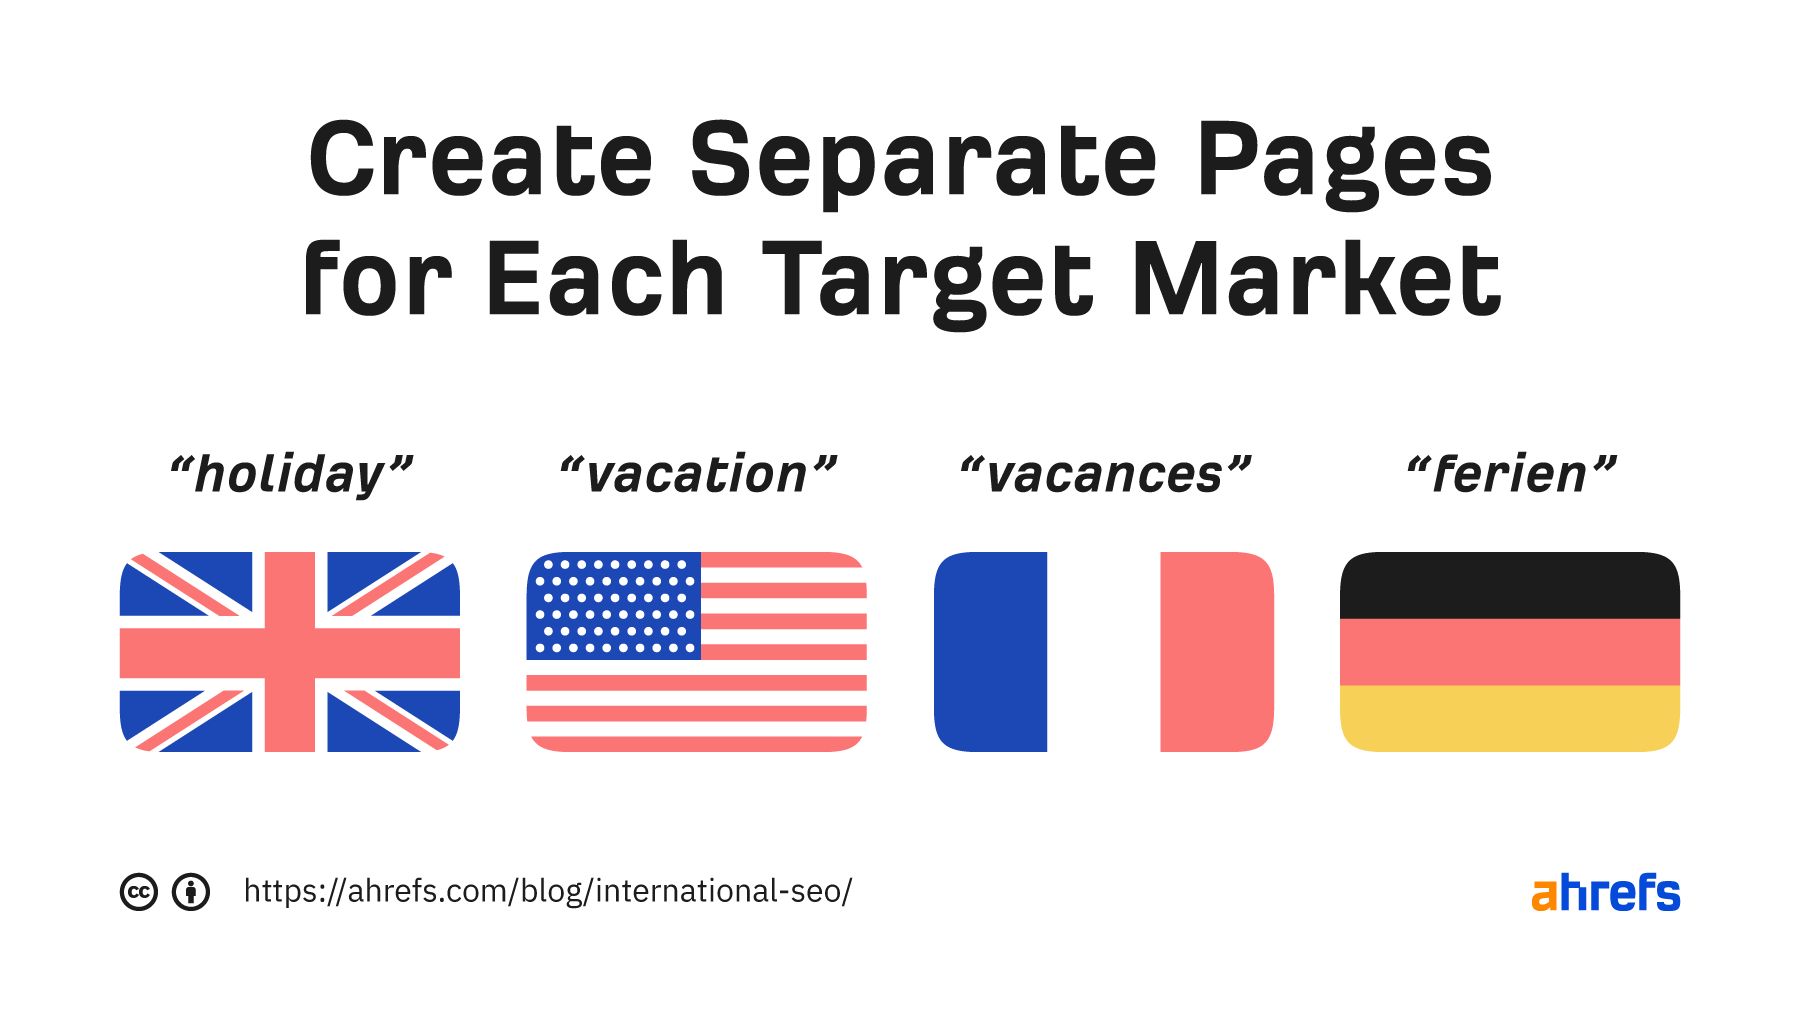 Why you should create separate pages for each target market
